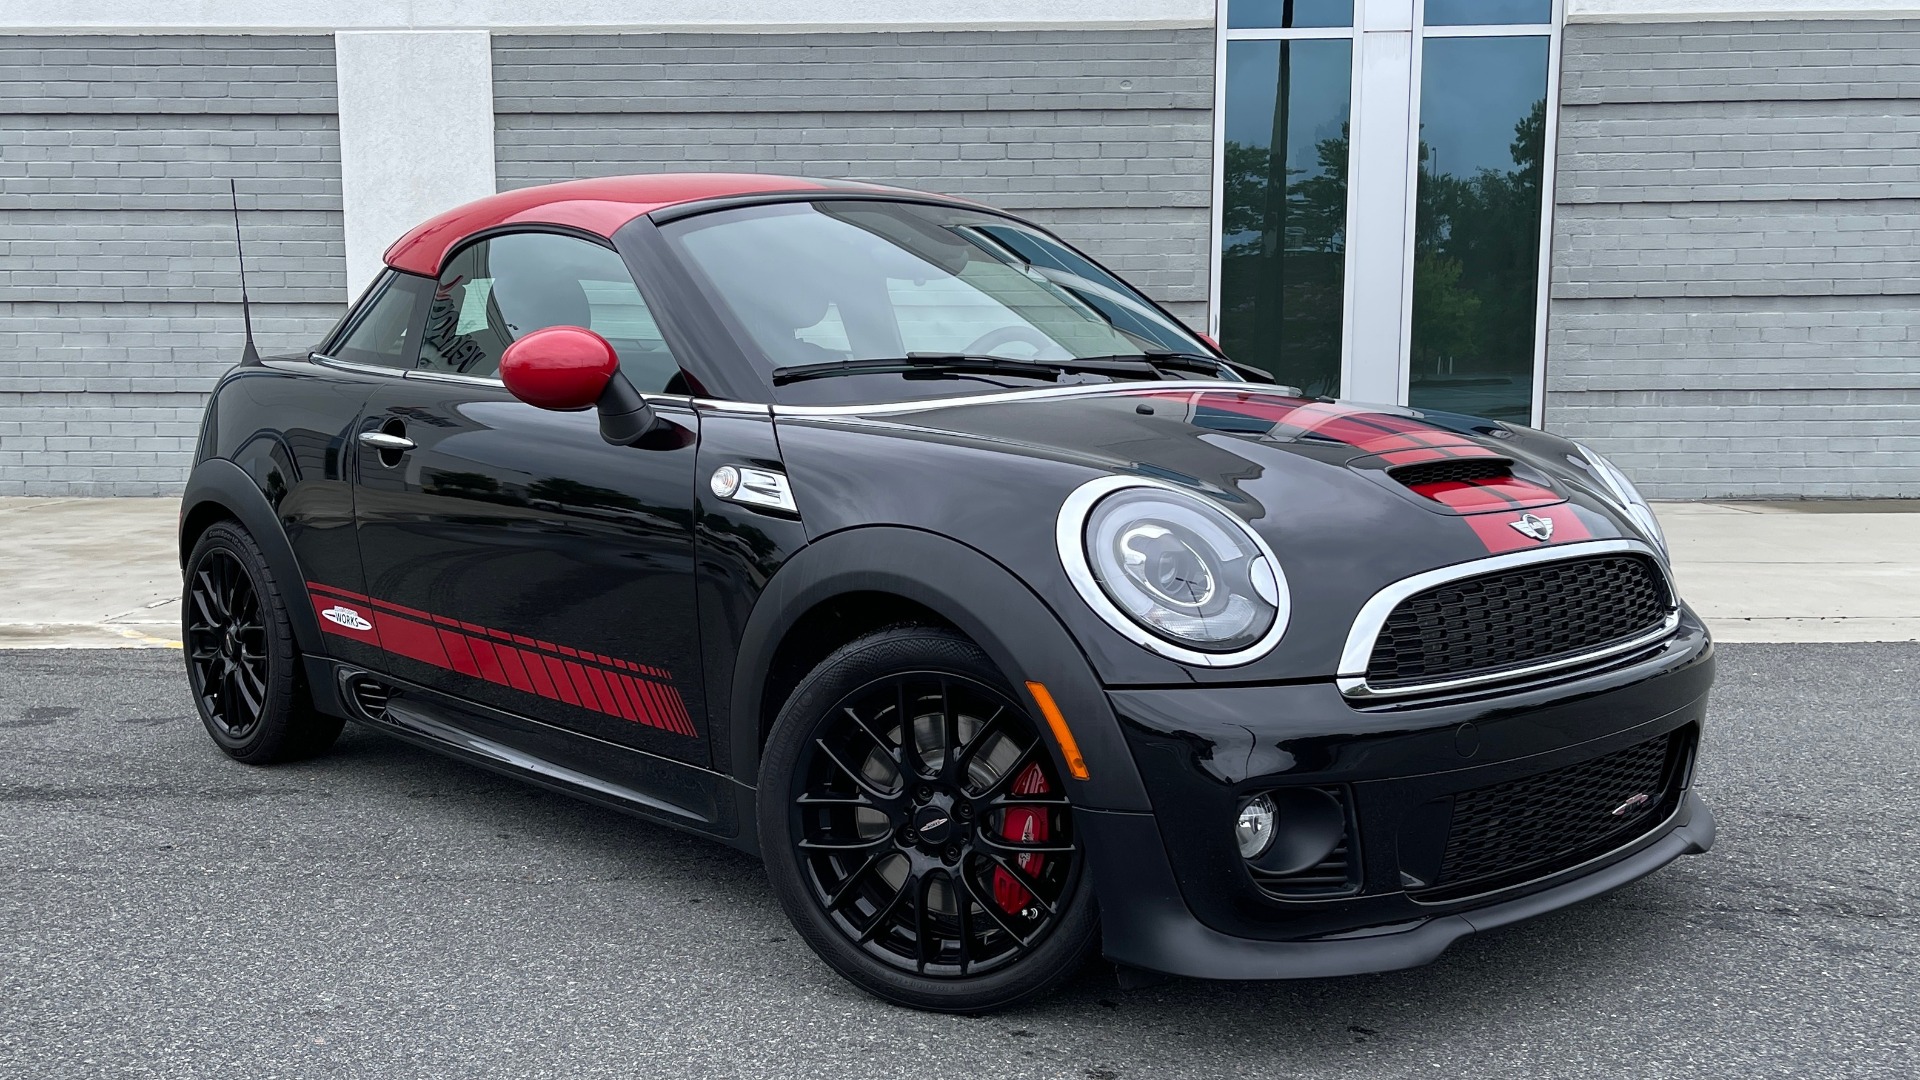 Used 2013 MINI COOPER COUPE JOHN COOPER WORKS / 1.6L TURBO / AUTO / H/K SOUND for sale Sold at Formula Imports in Charlotte NC 28227 4